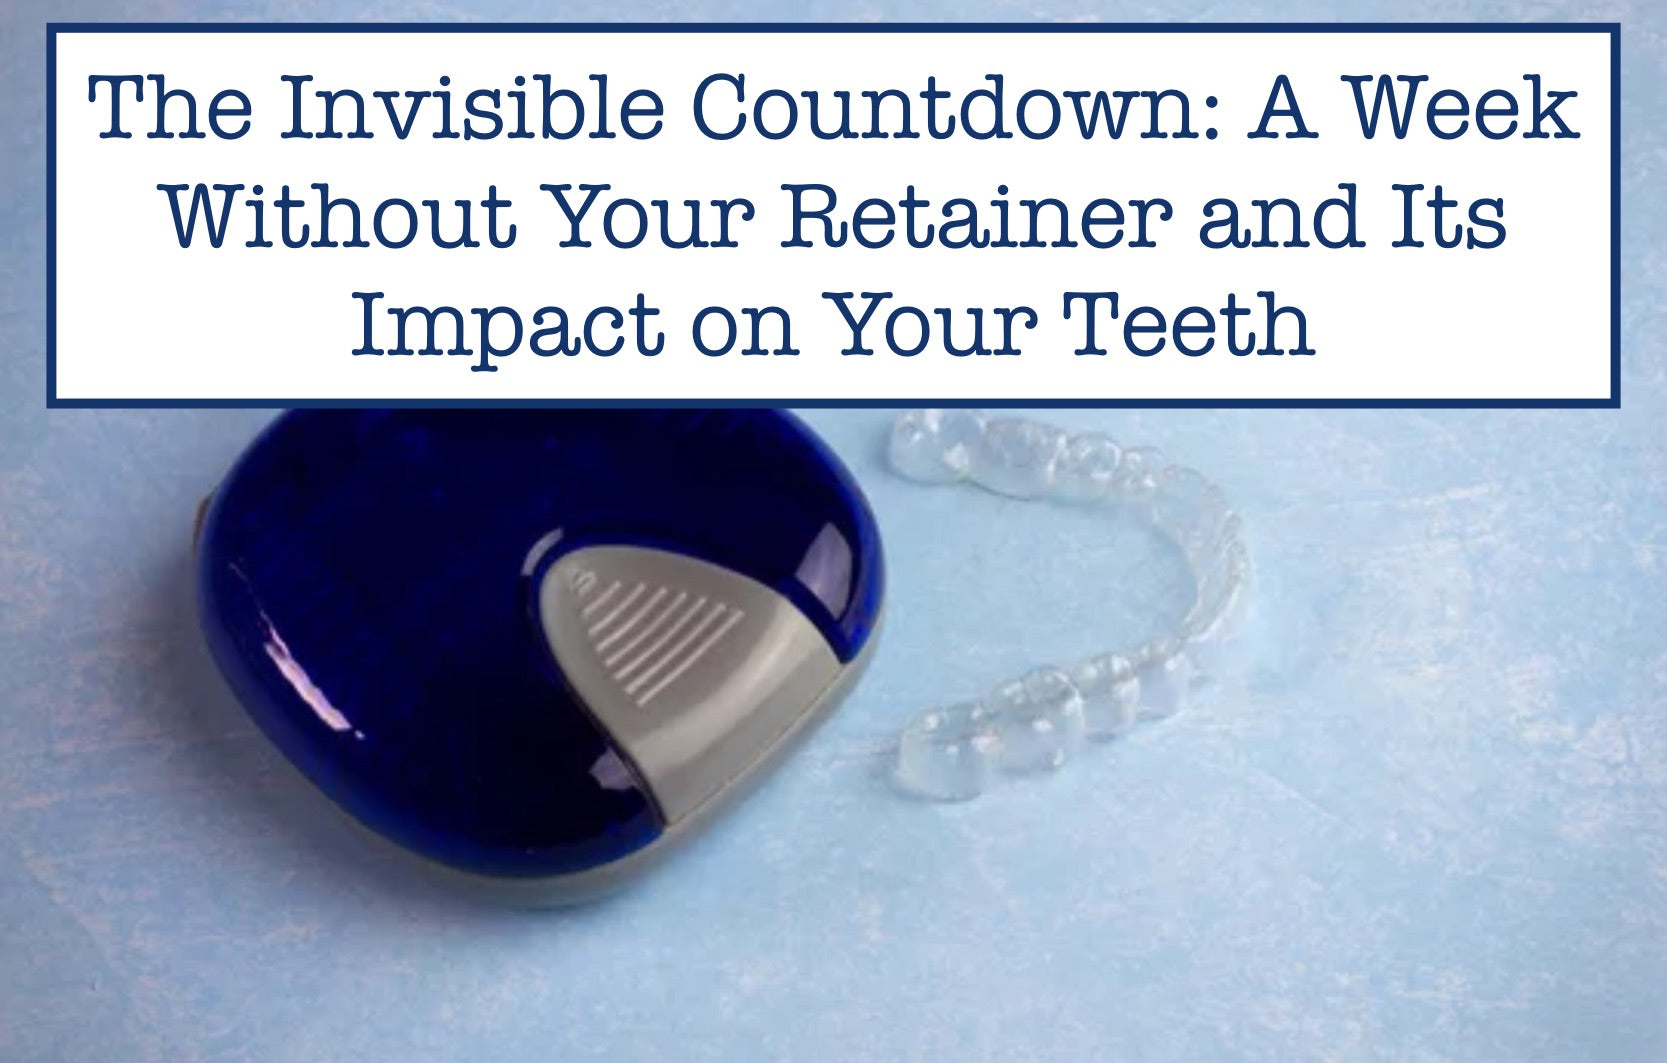 The Invisible Countdown: A Week Without Your Retainer and Its Impact on Your Teeth